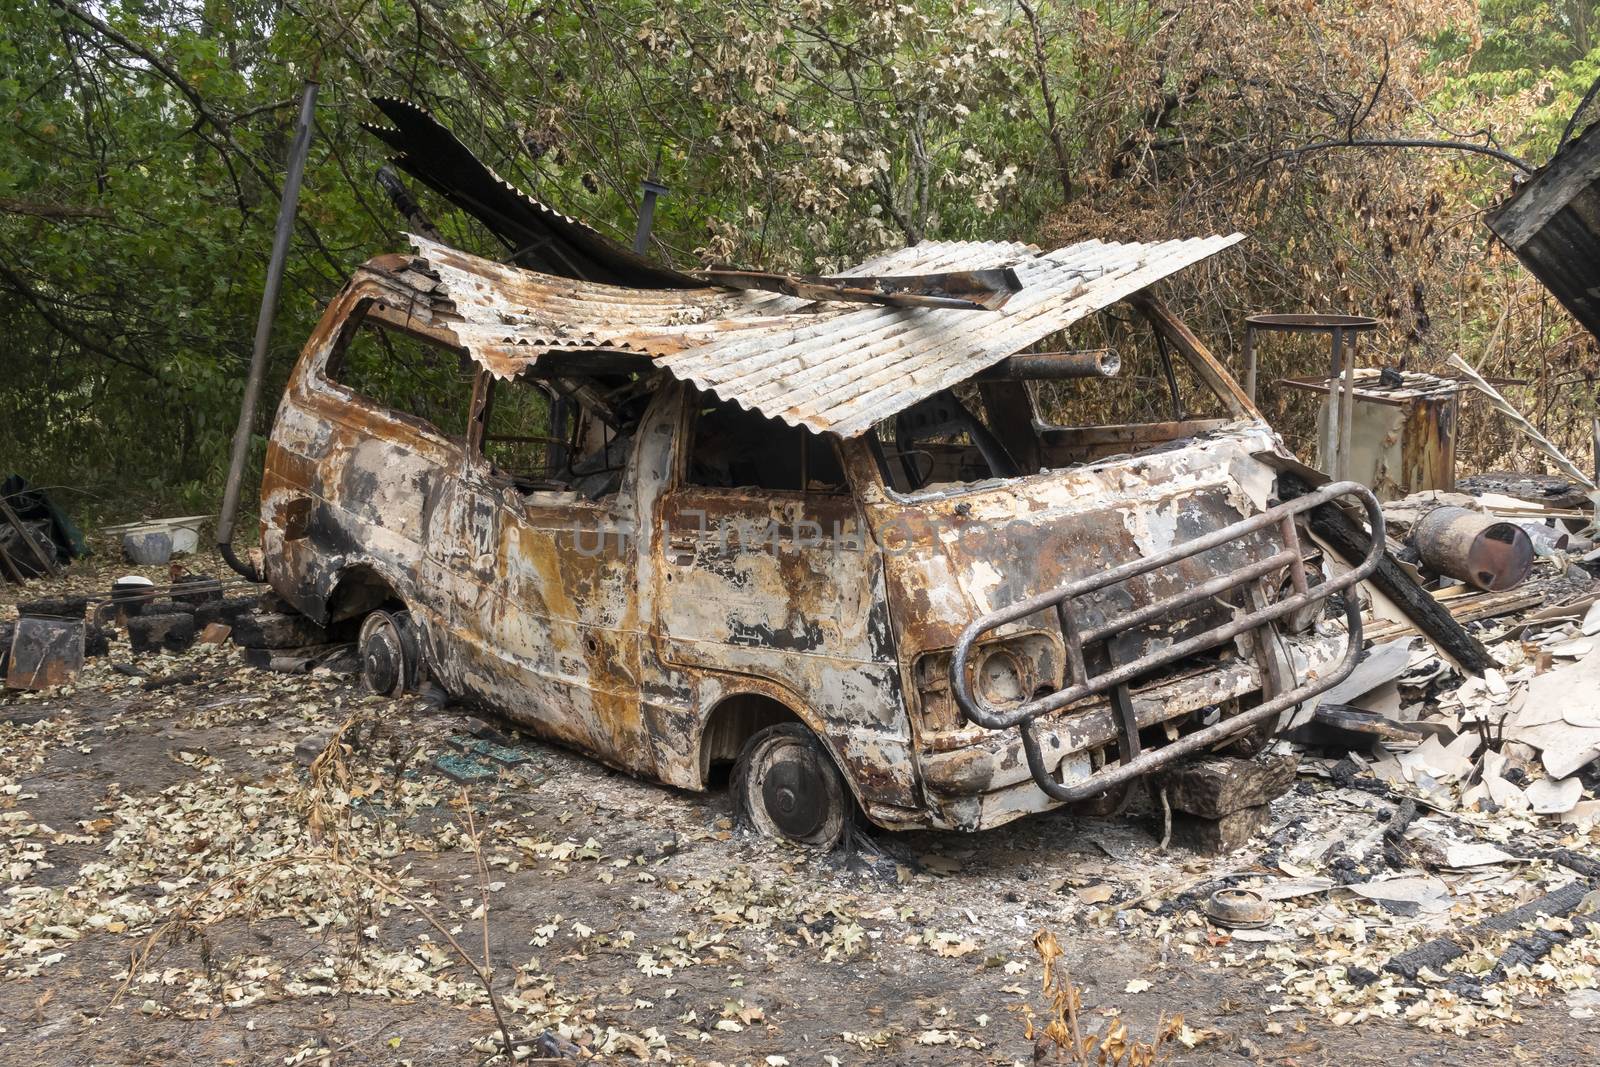 A burnt vehicle due to bushfire in The Blue Mountains in regional Australia by WittkePhotos